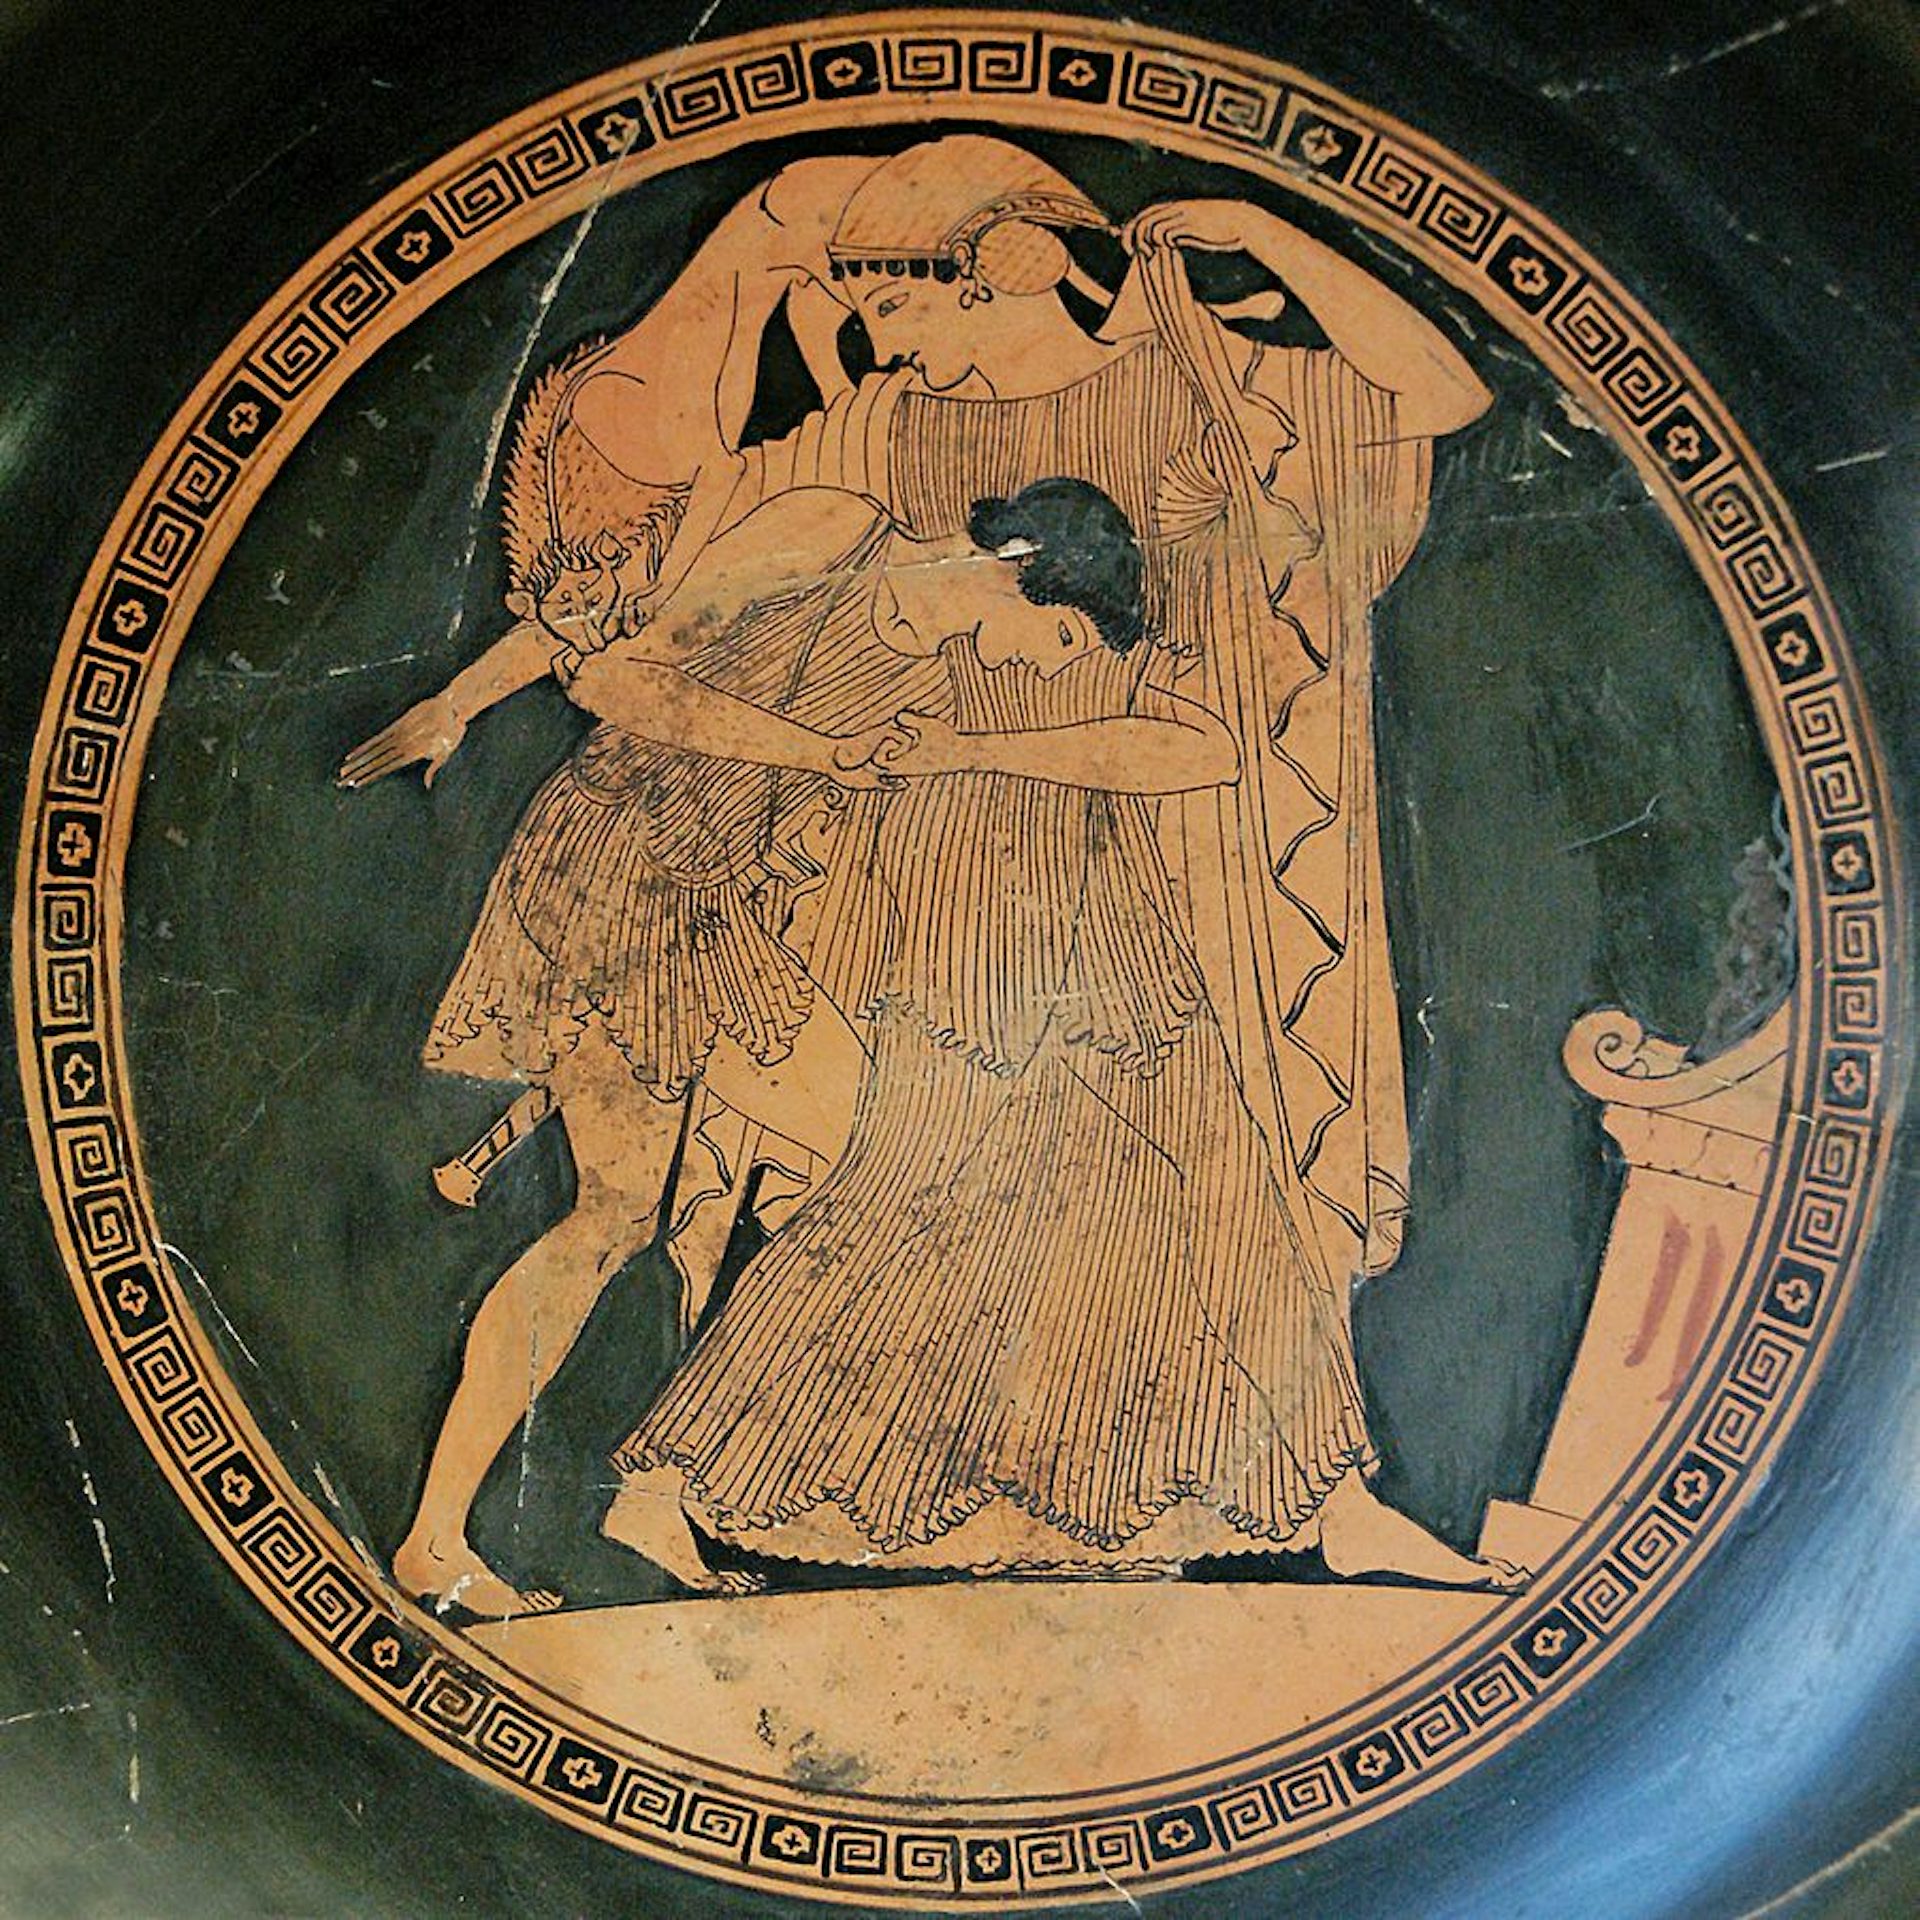 Vase painting of Peleus capturing Thetis as she changes shape, attributed to Douris